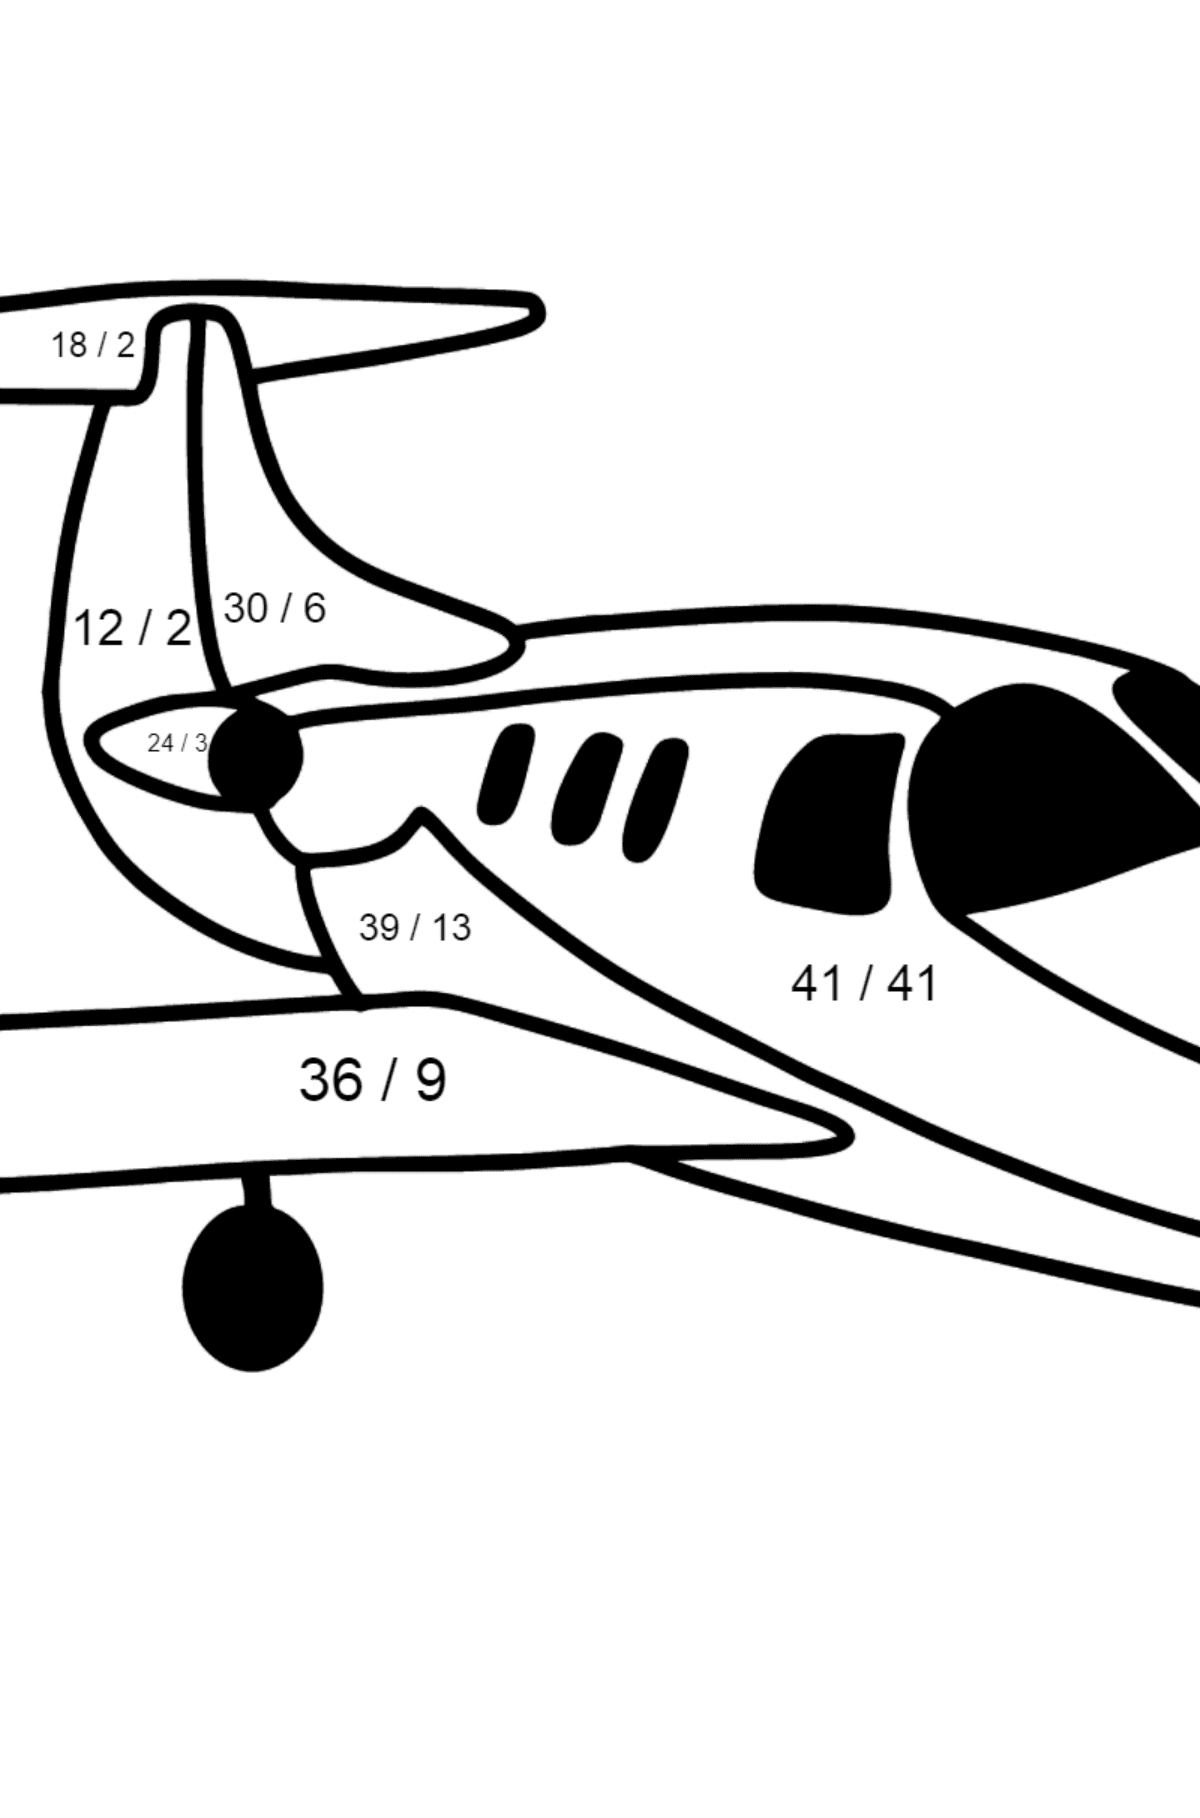 Airplane Private Jet coloring page - Math Coloring - Division for Kids